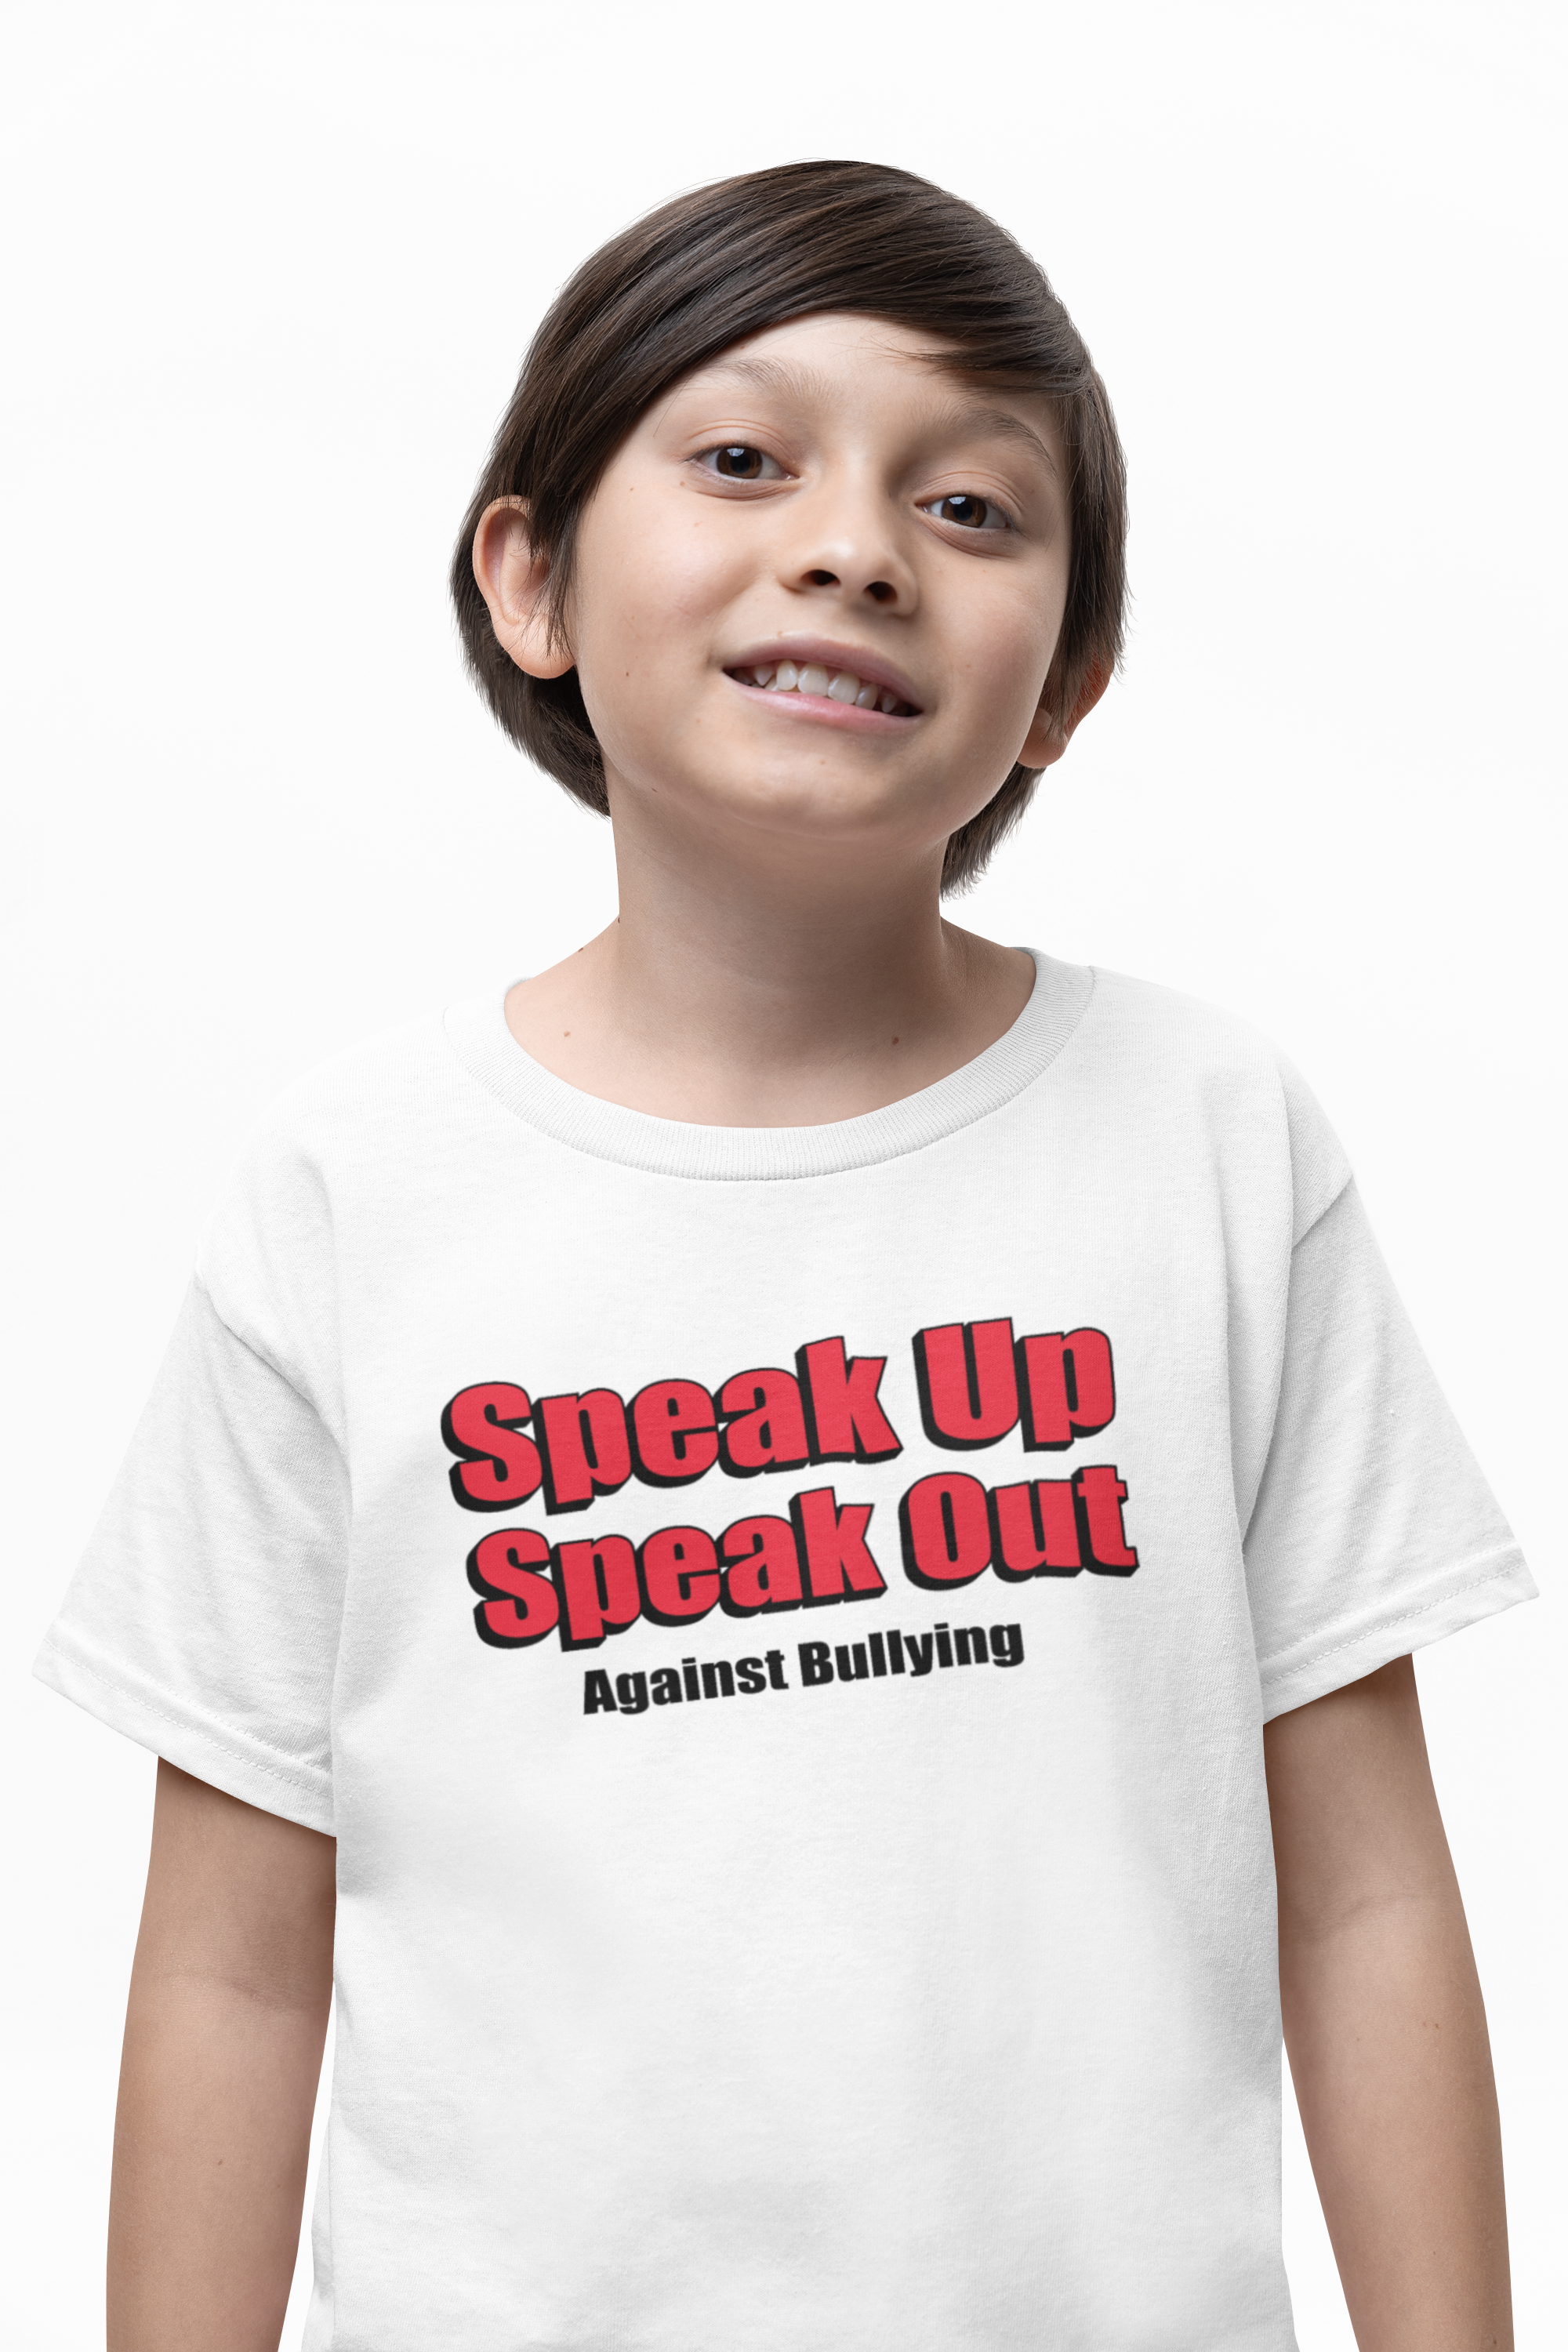 mockup-of-a-smiling-boy-wearing-a-rounded-neck-gildan-tee-in-a-studio-m37687 (5).png